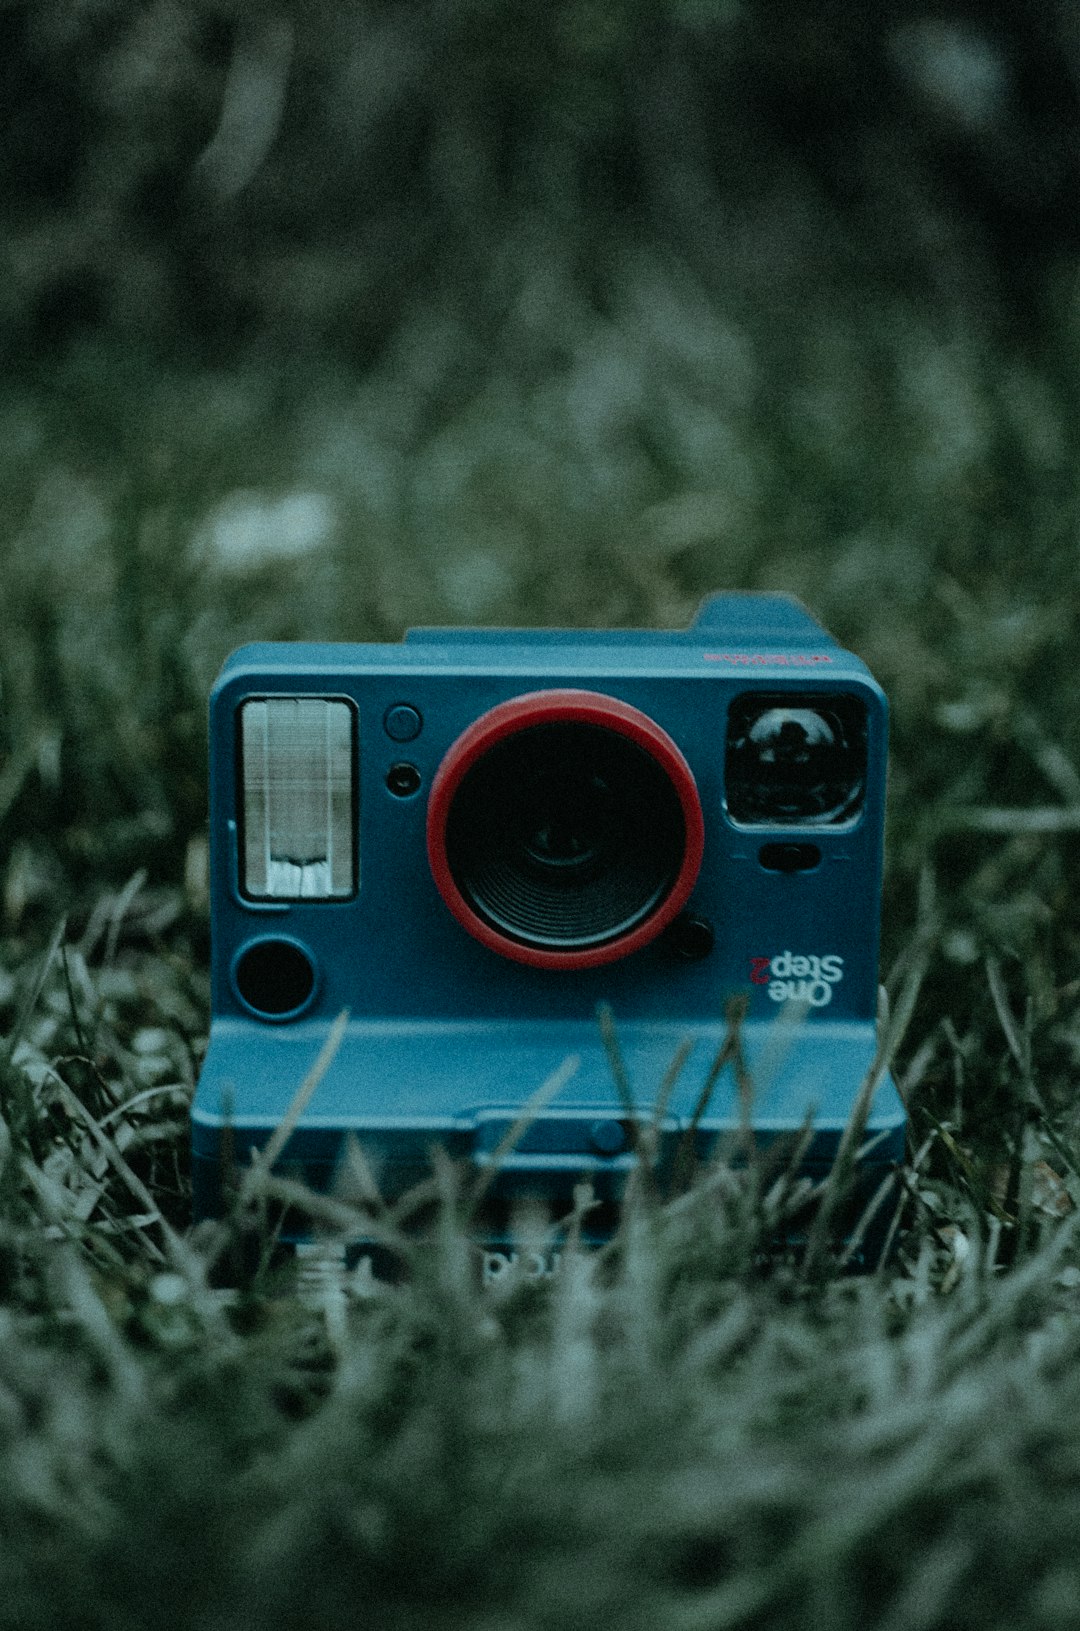 teal and black camera on green grass